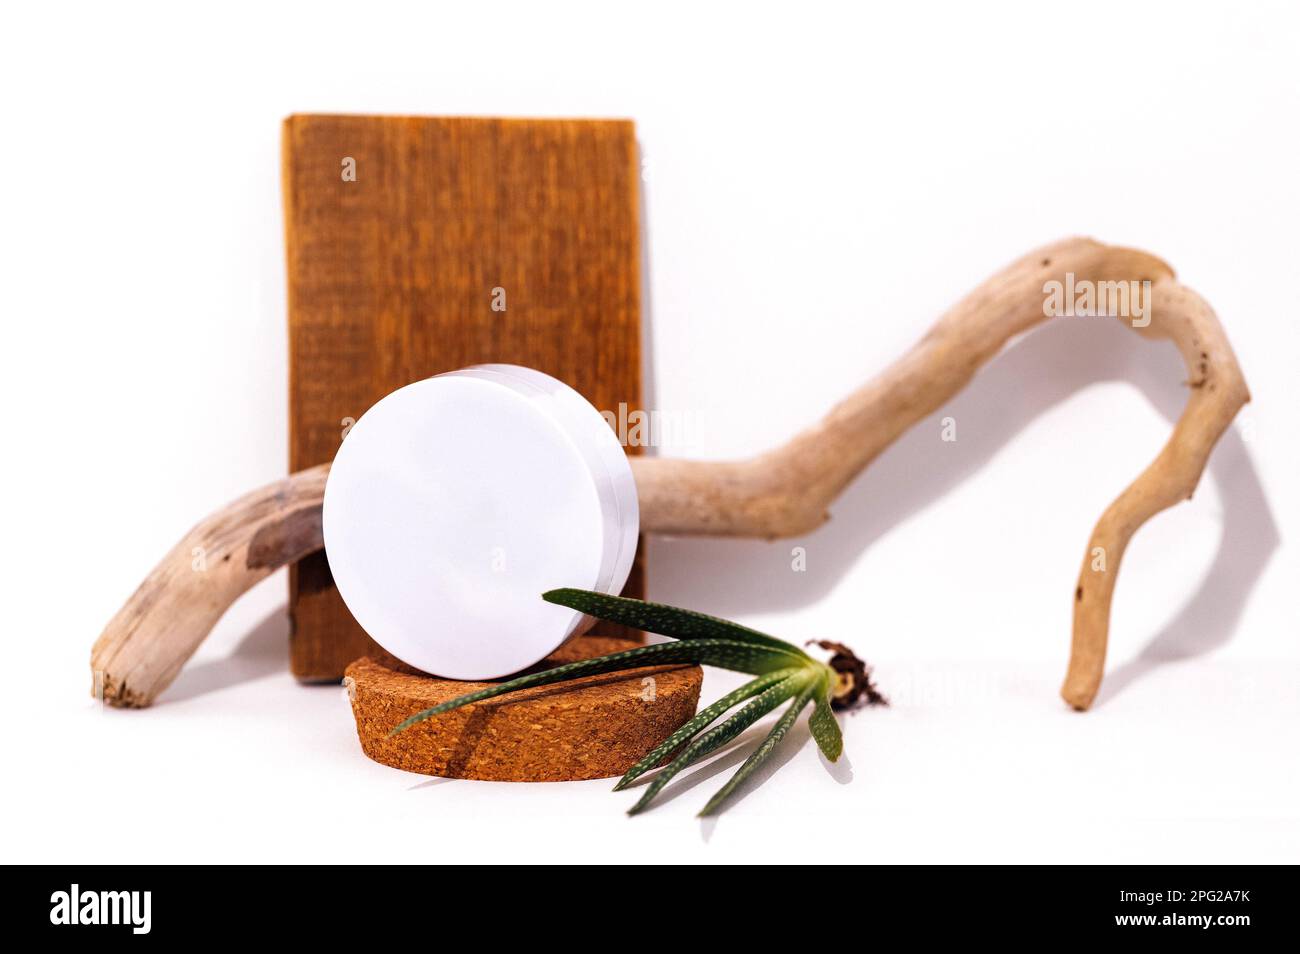 Mockup of round box for beauty product on cork stage and aloe plant. Branch or tree root and wooden plank in background. White backrop. Free spase for Stock Photo